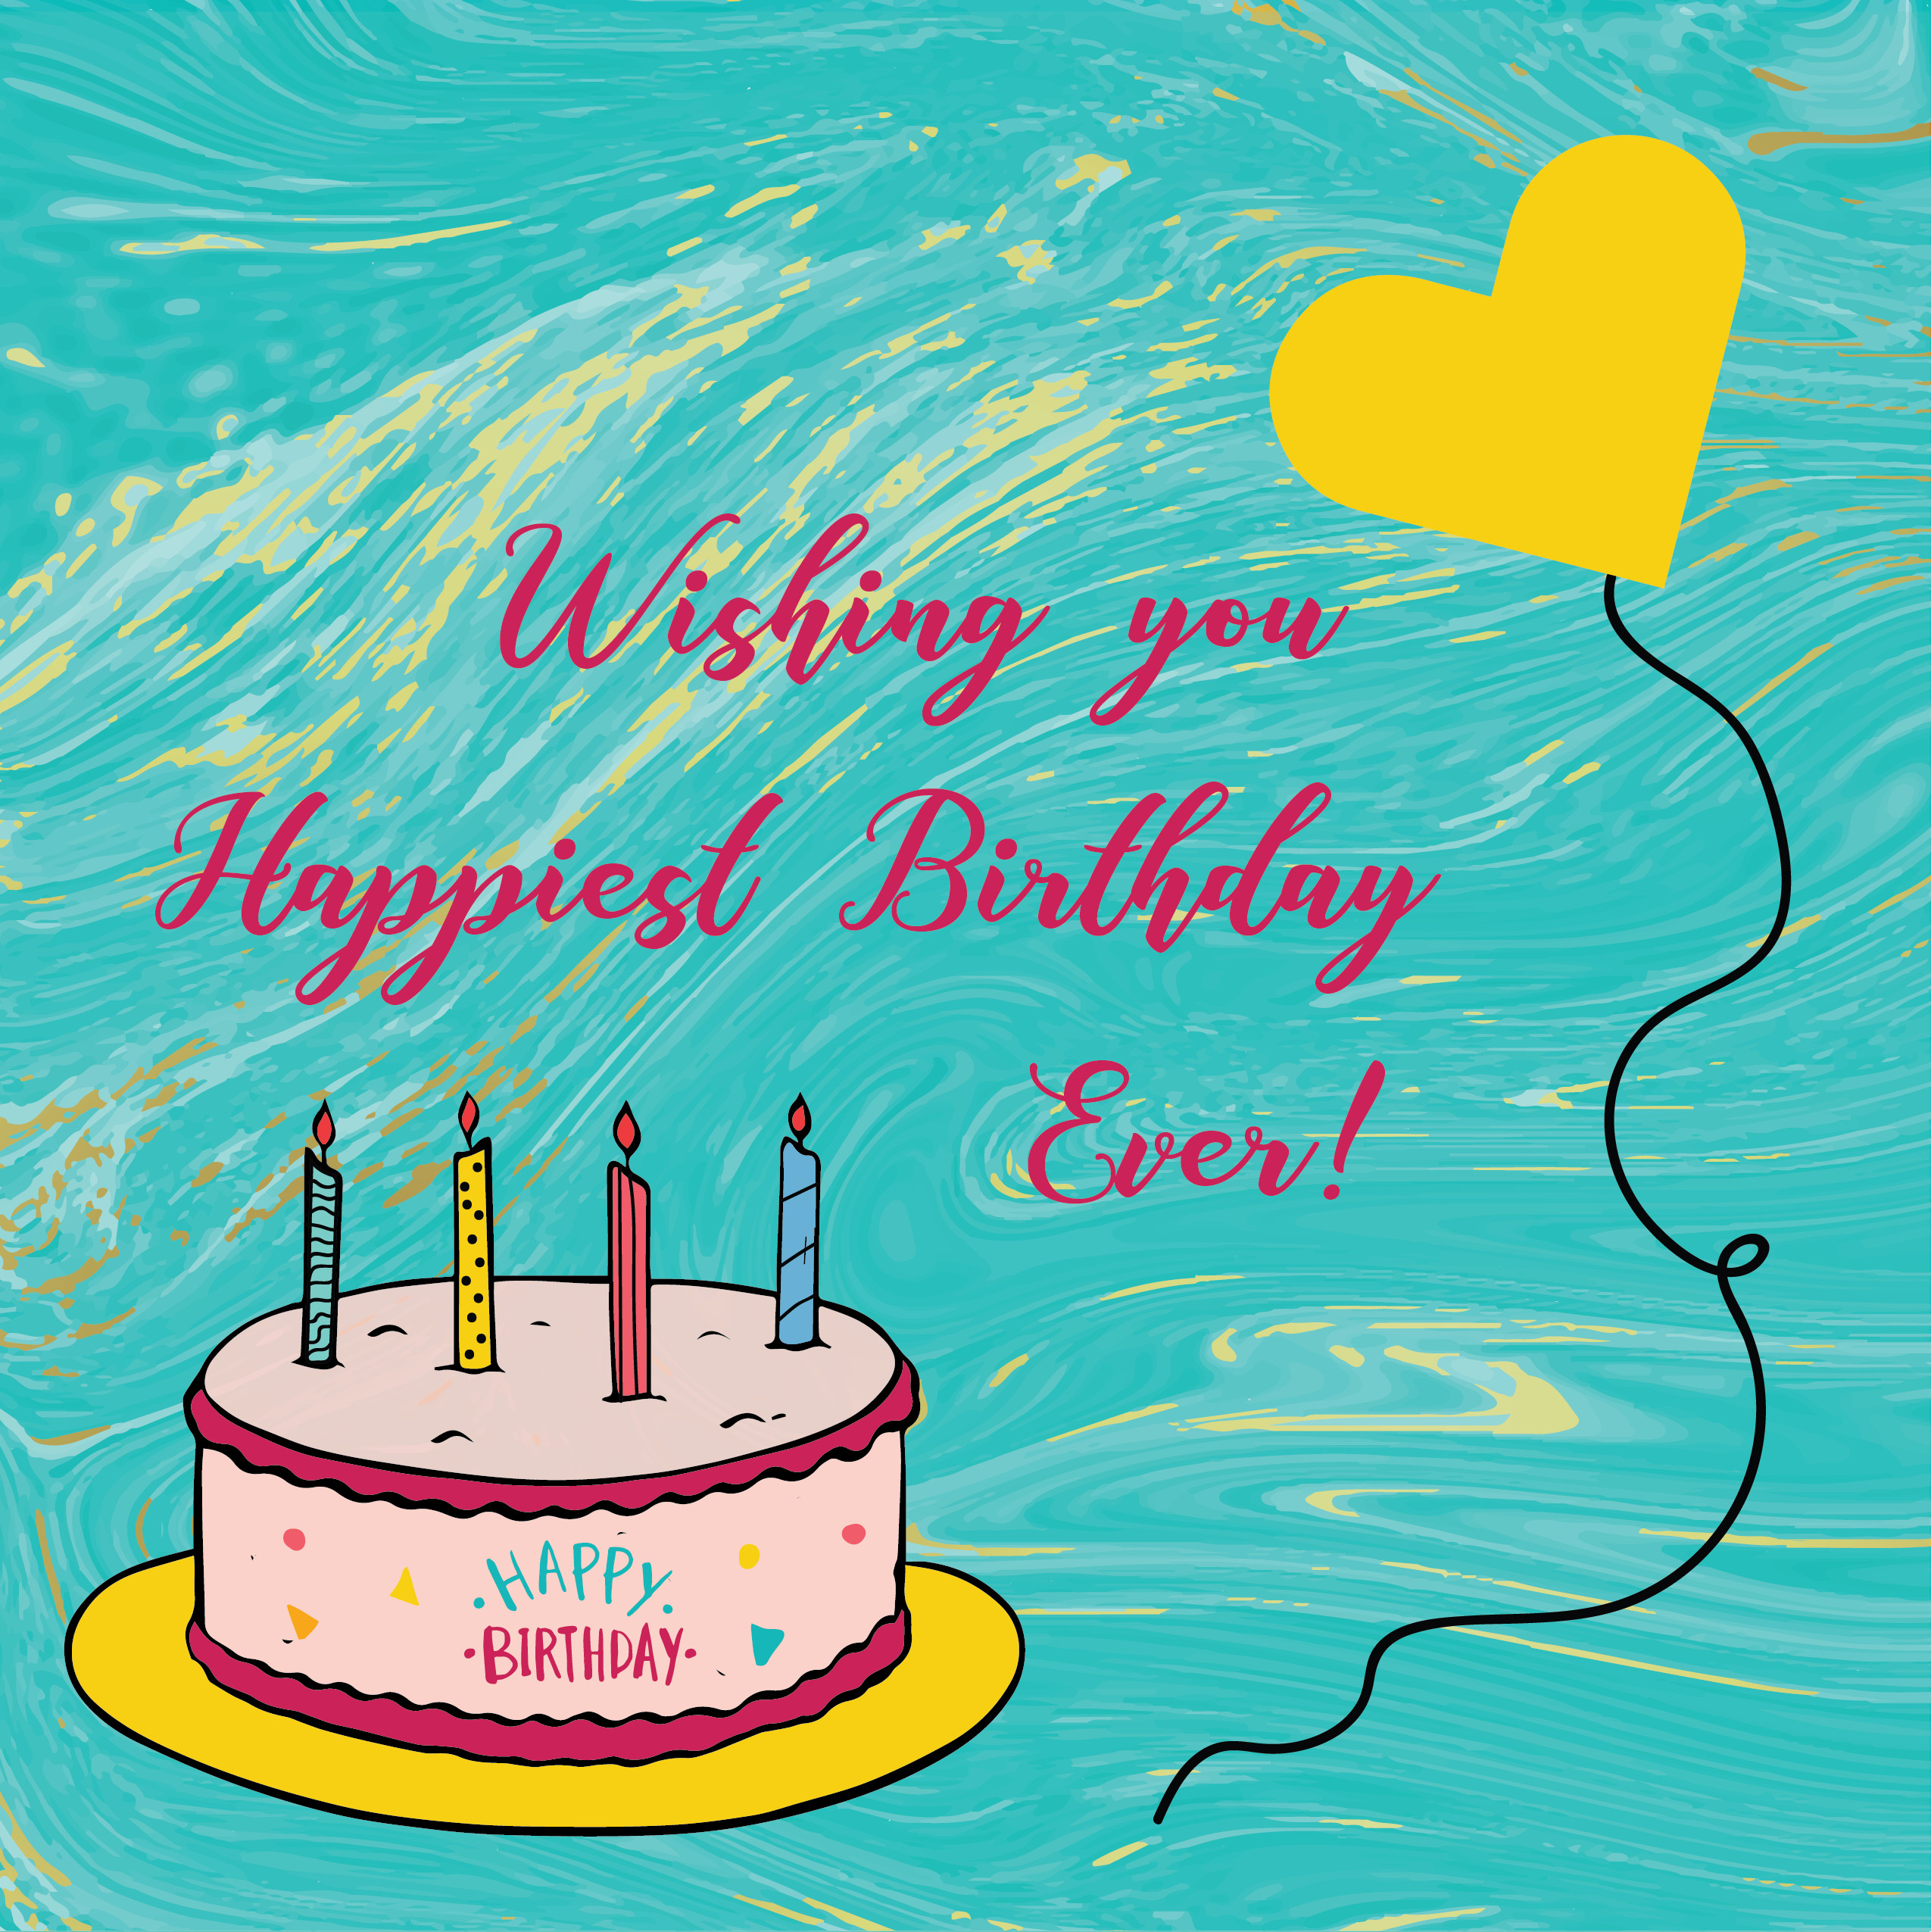 Images Of Happy Birthday Wishes
 200 Happy Birthday Wishes & Quotes with Funny & Cute